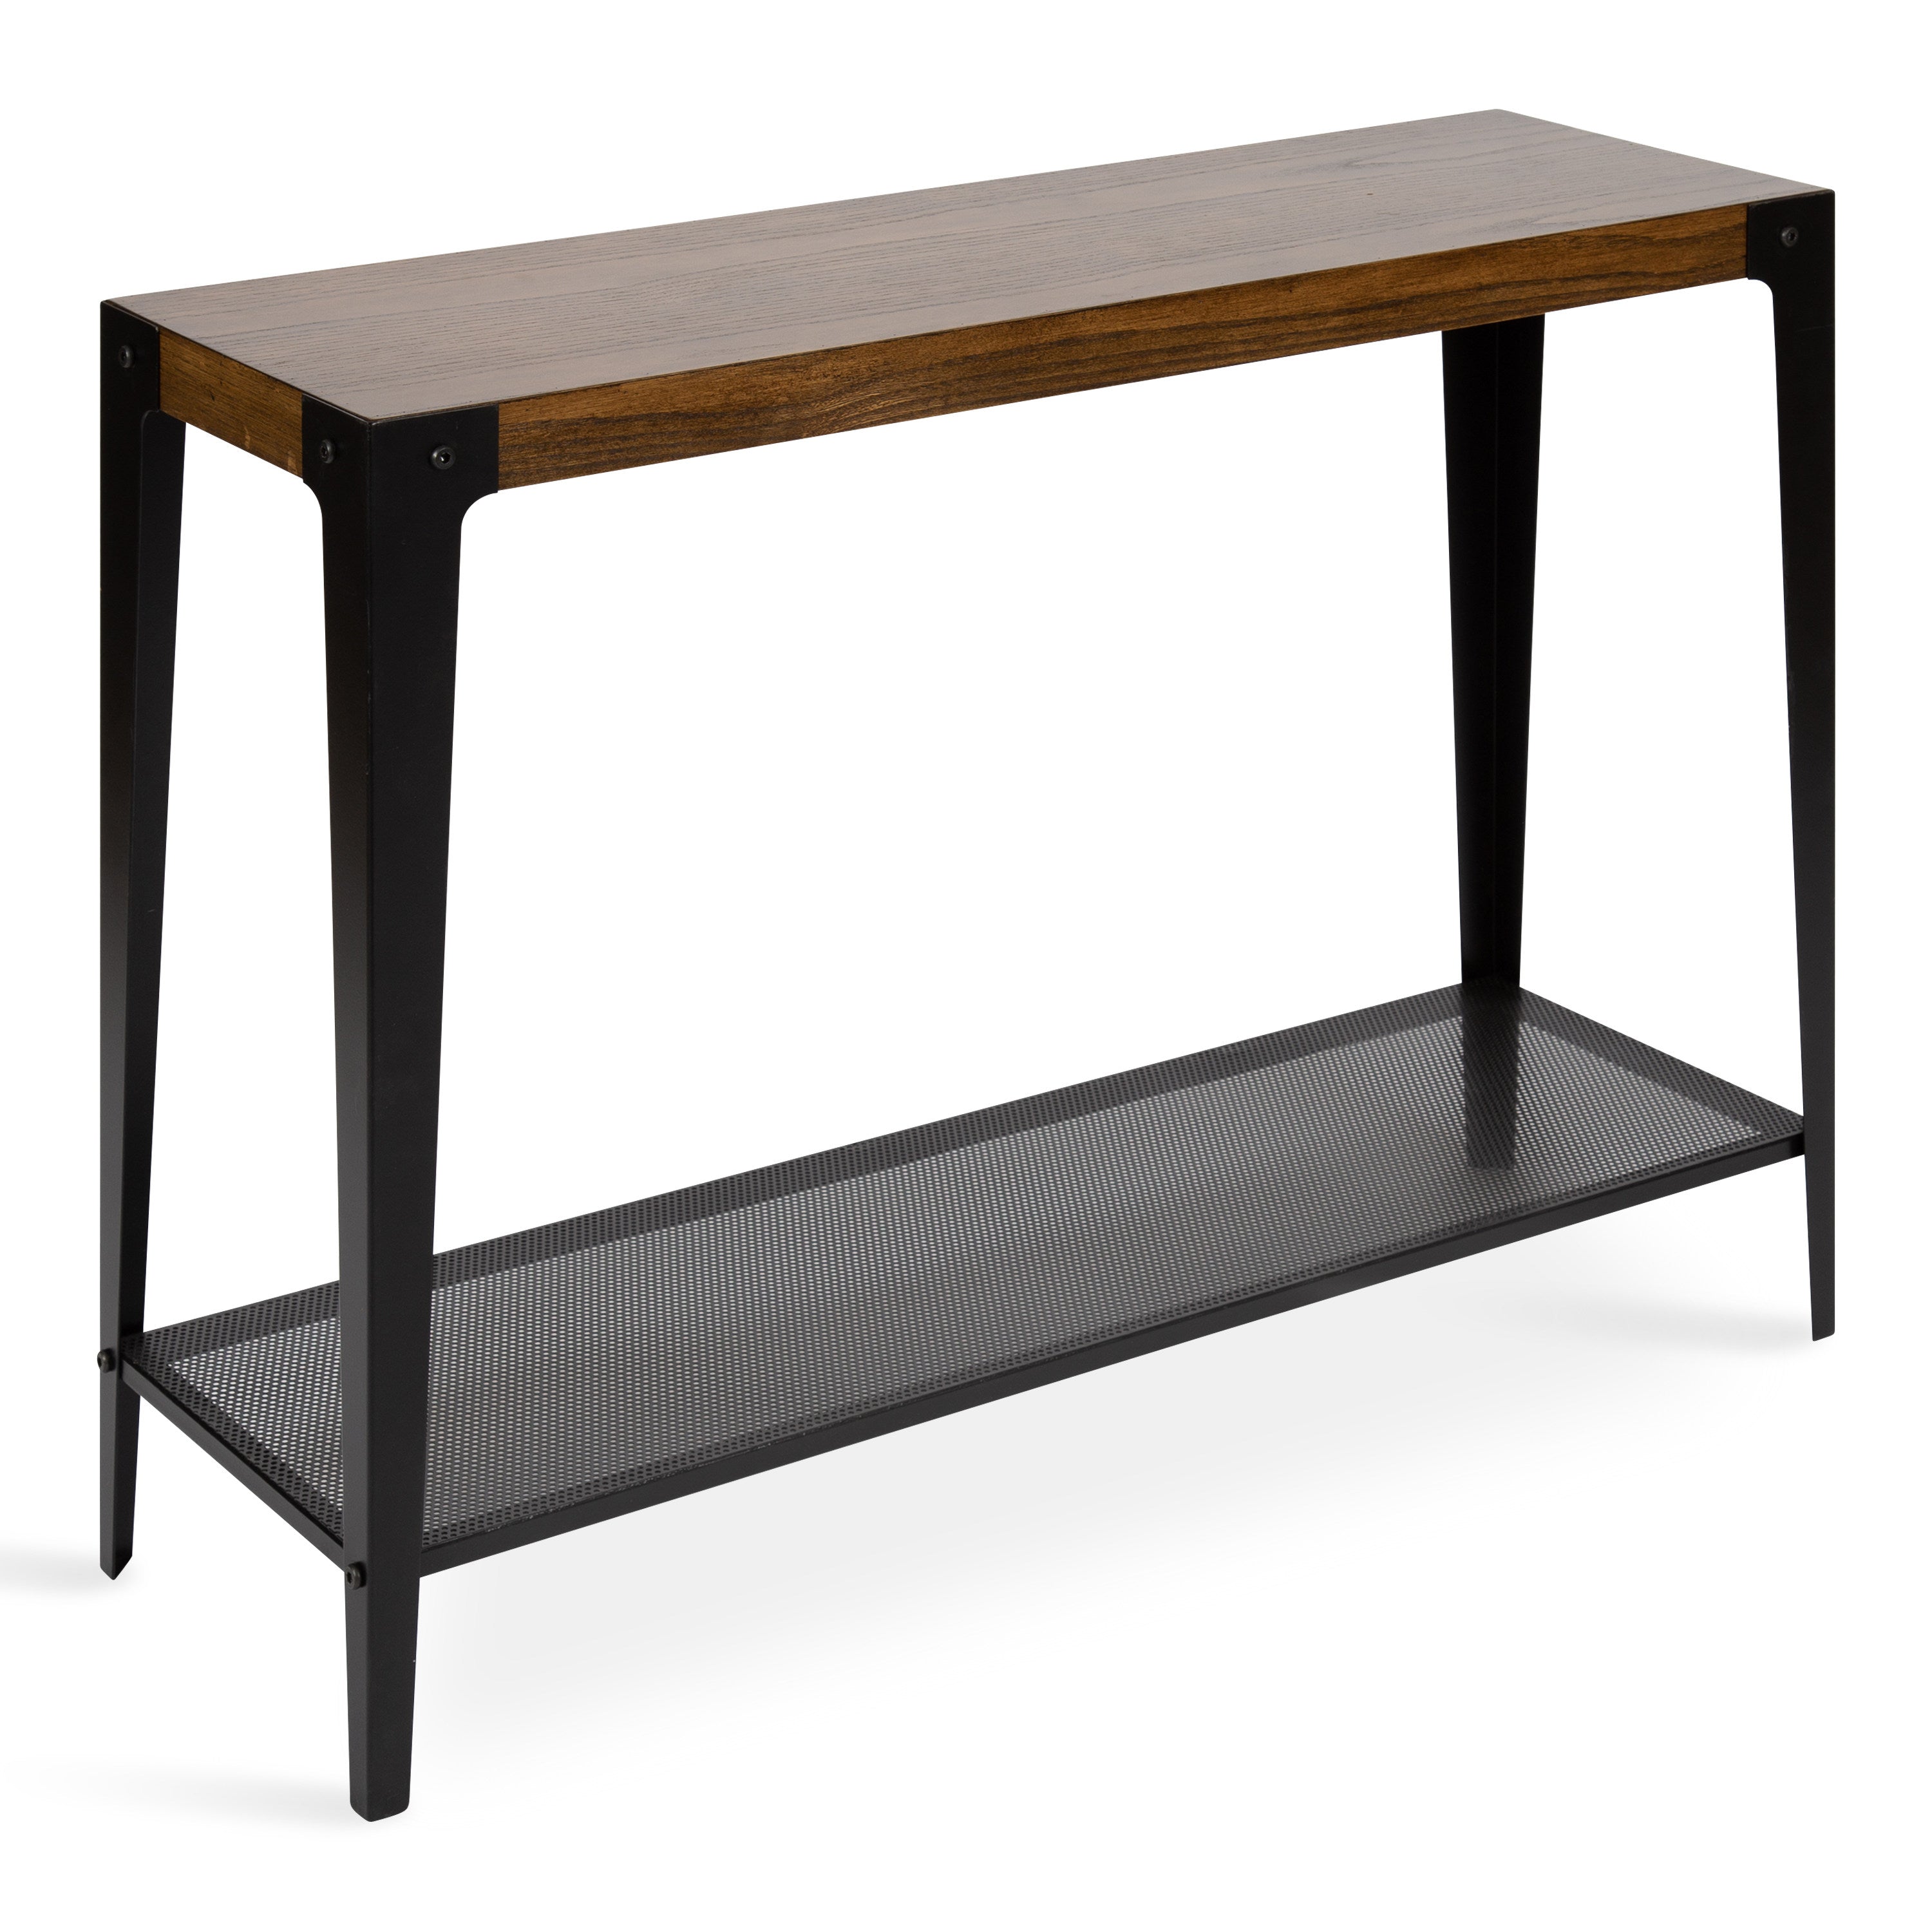 Vexler Wood and Metal Console Table